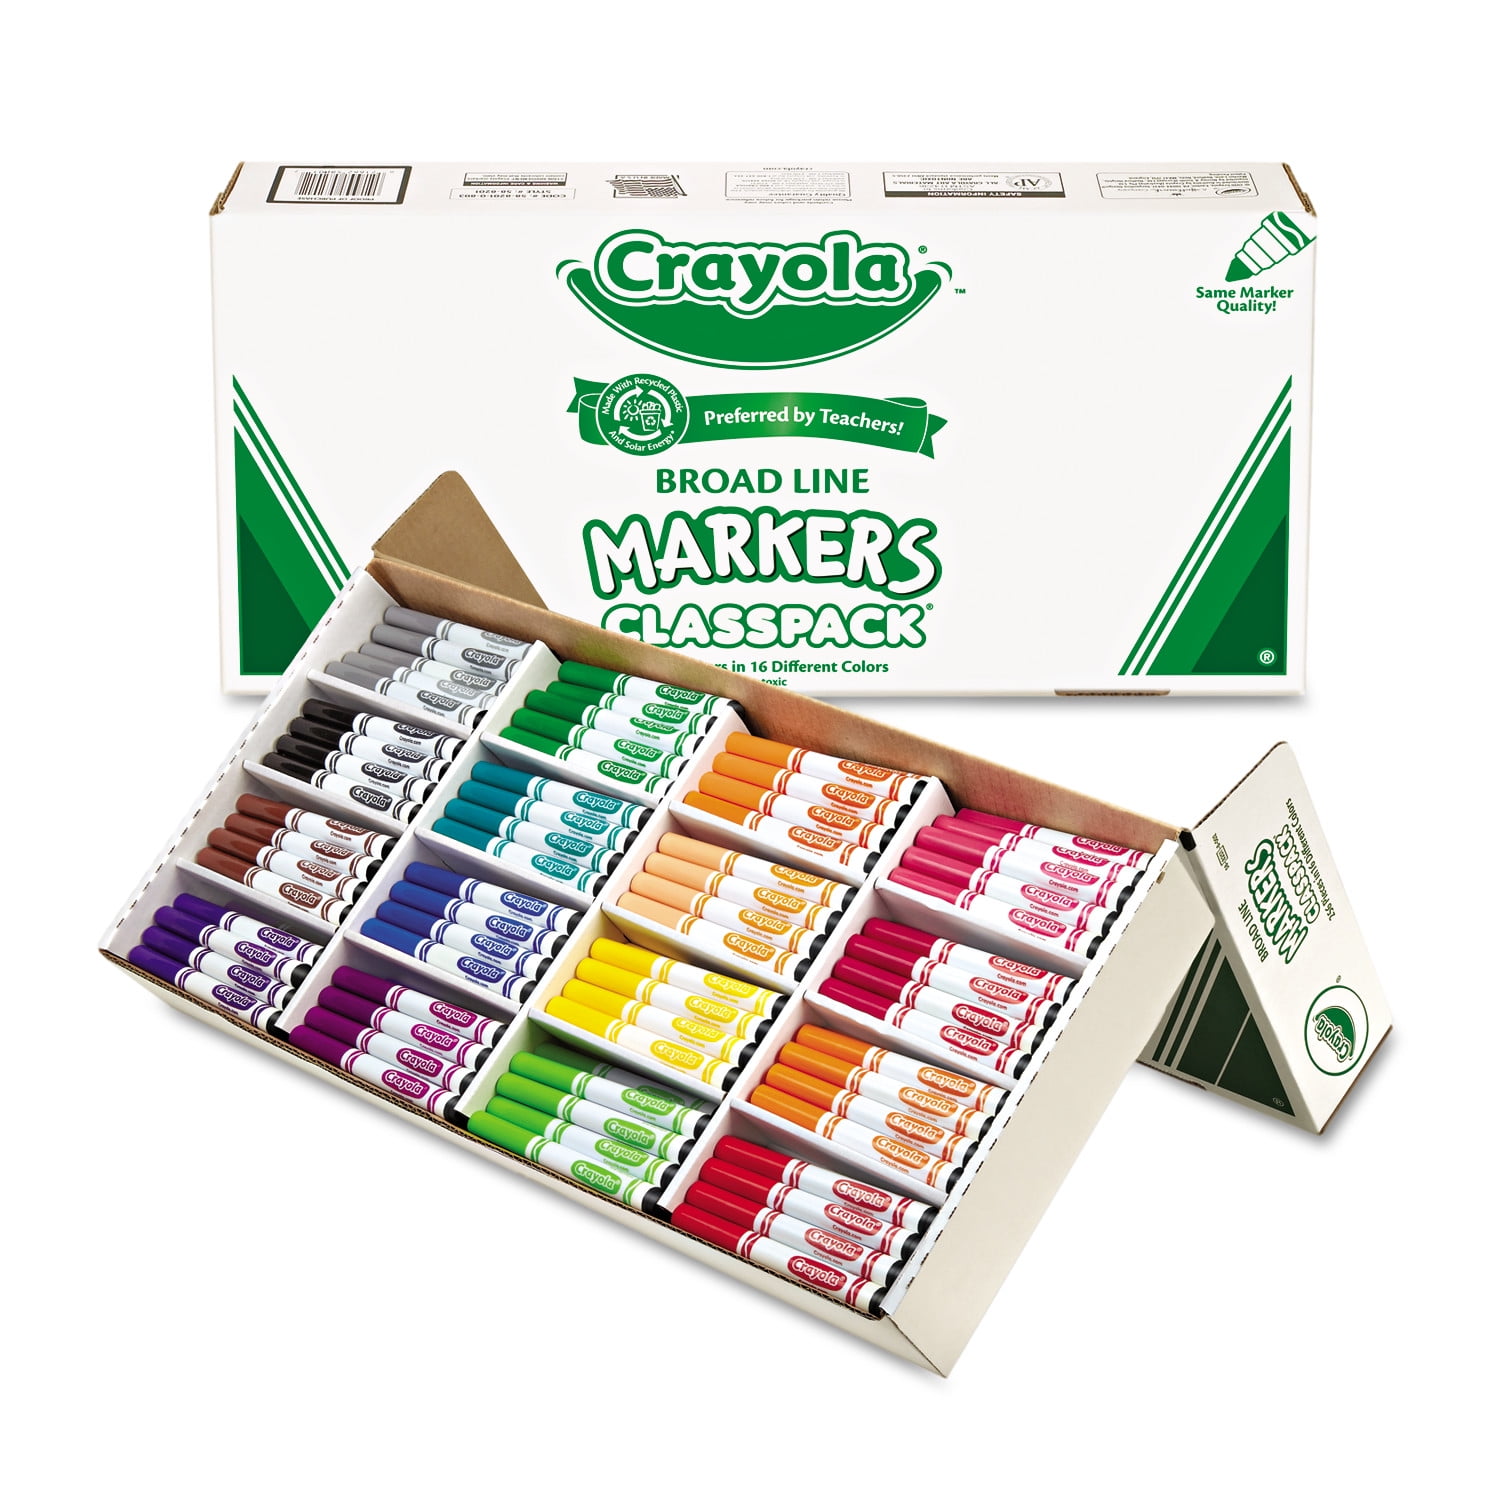 Crayola Broad Line Markers - Black (12ct), Markers for Kids, Bulk School  Supplies for Teachers, Nontoxic, Marker Refill with Reusable Box - Buy  Online - 4833998